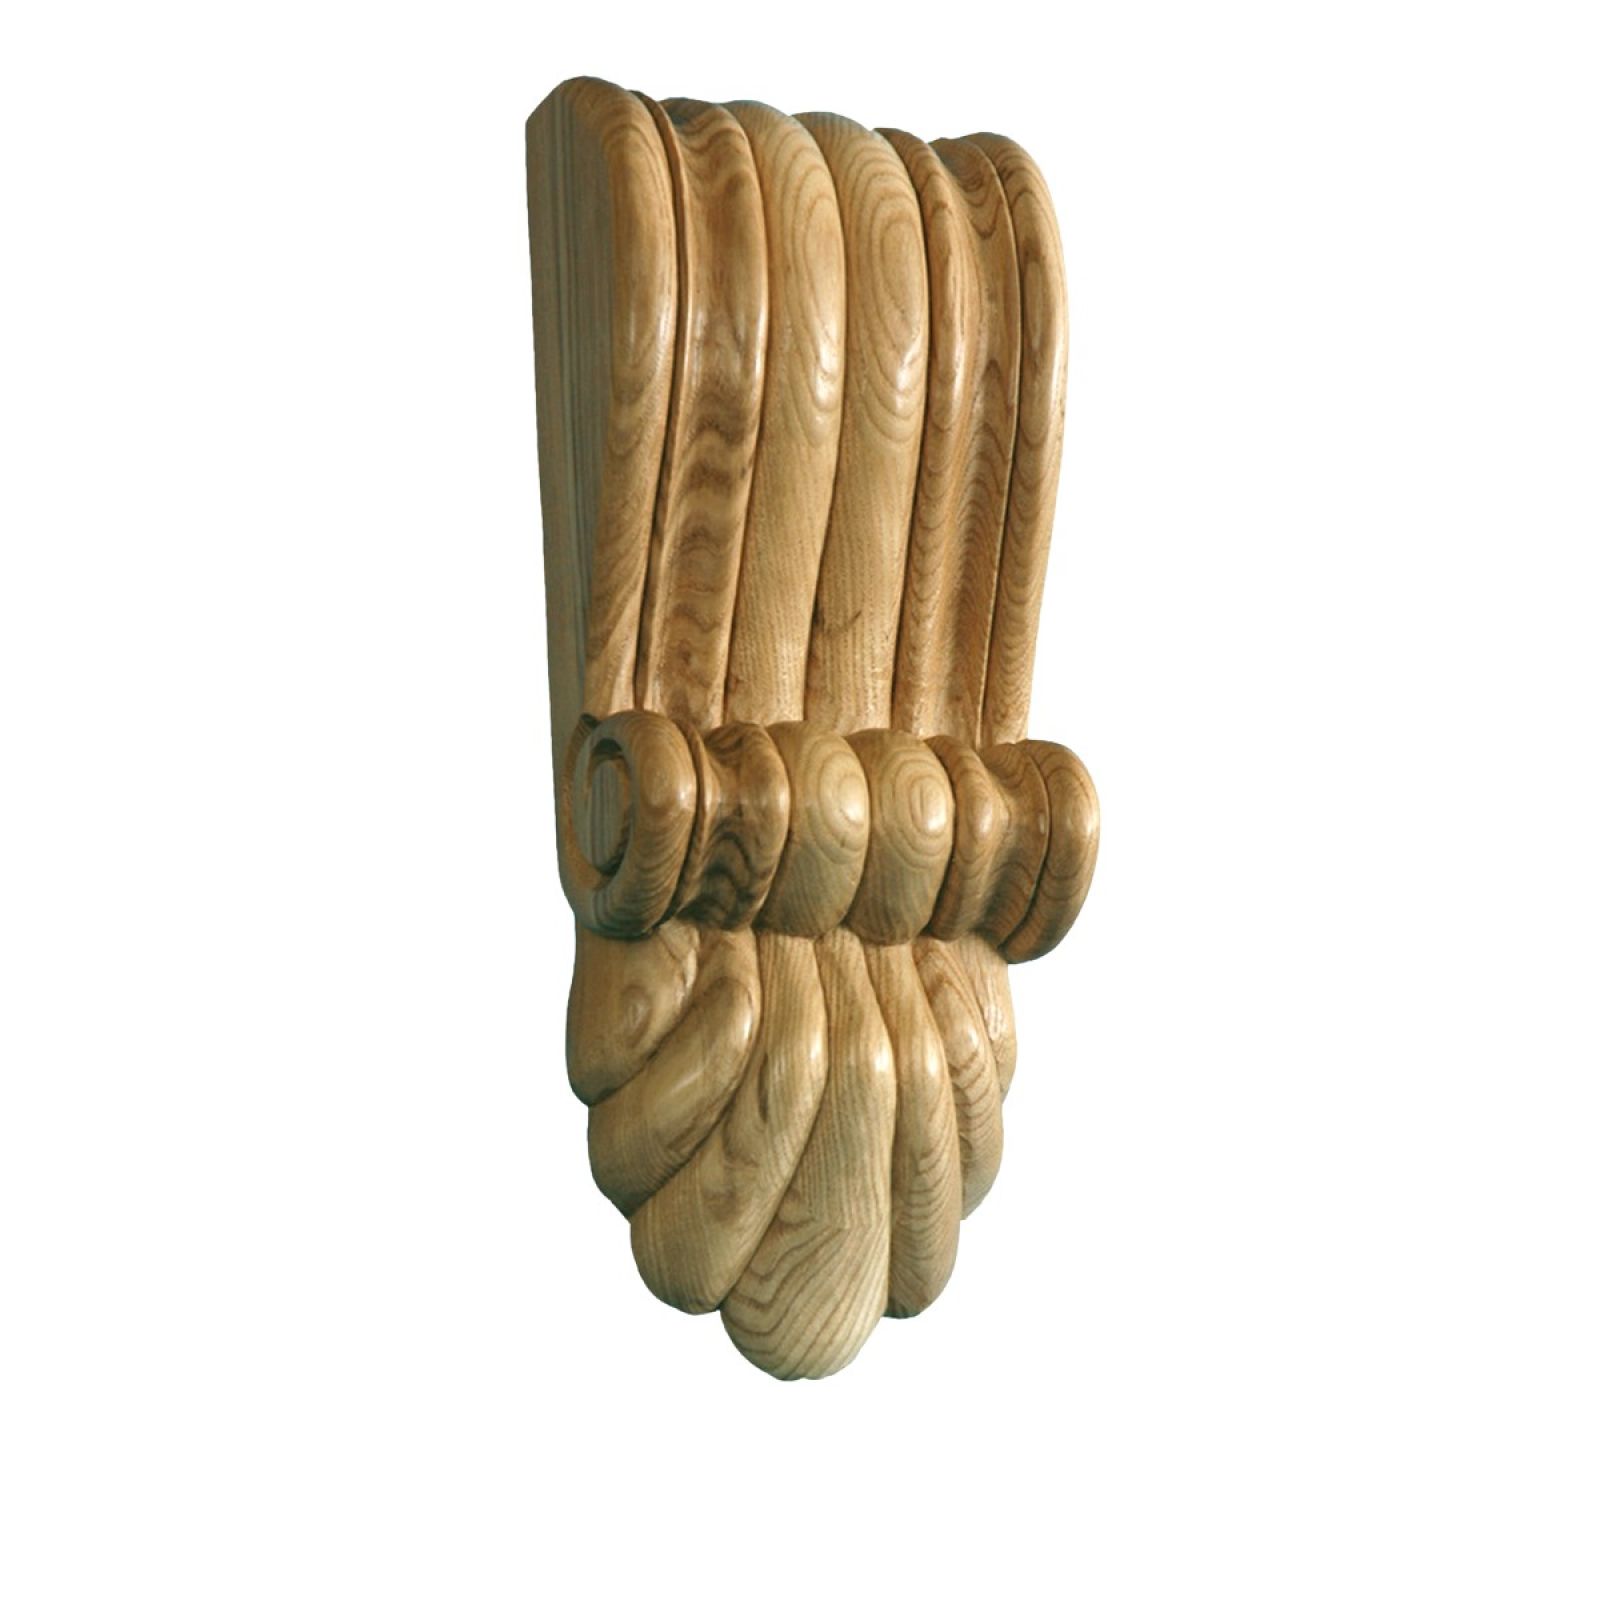 Large Reeded Corbel with fanned bottom